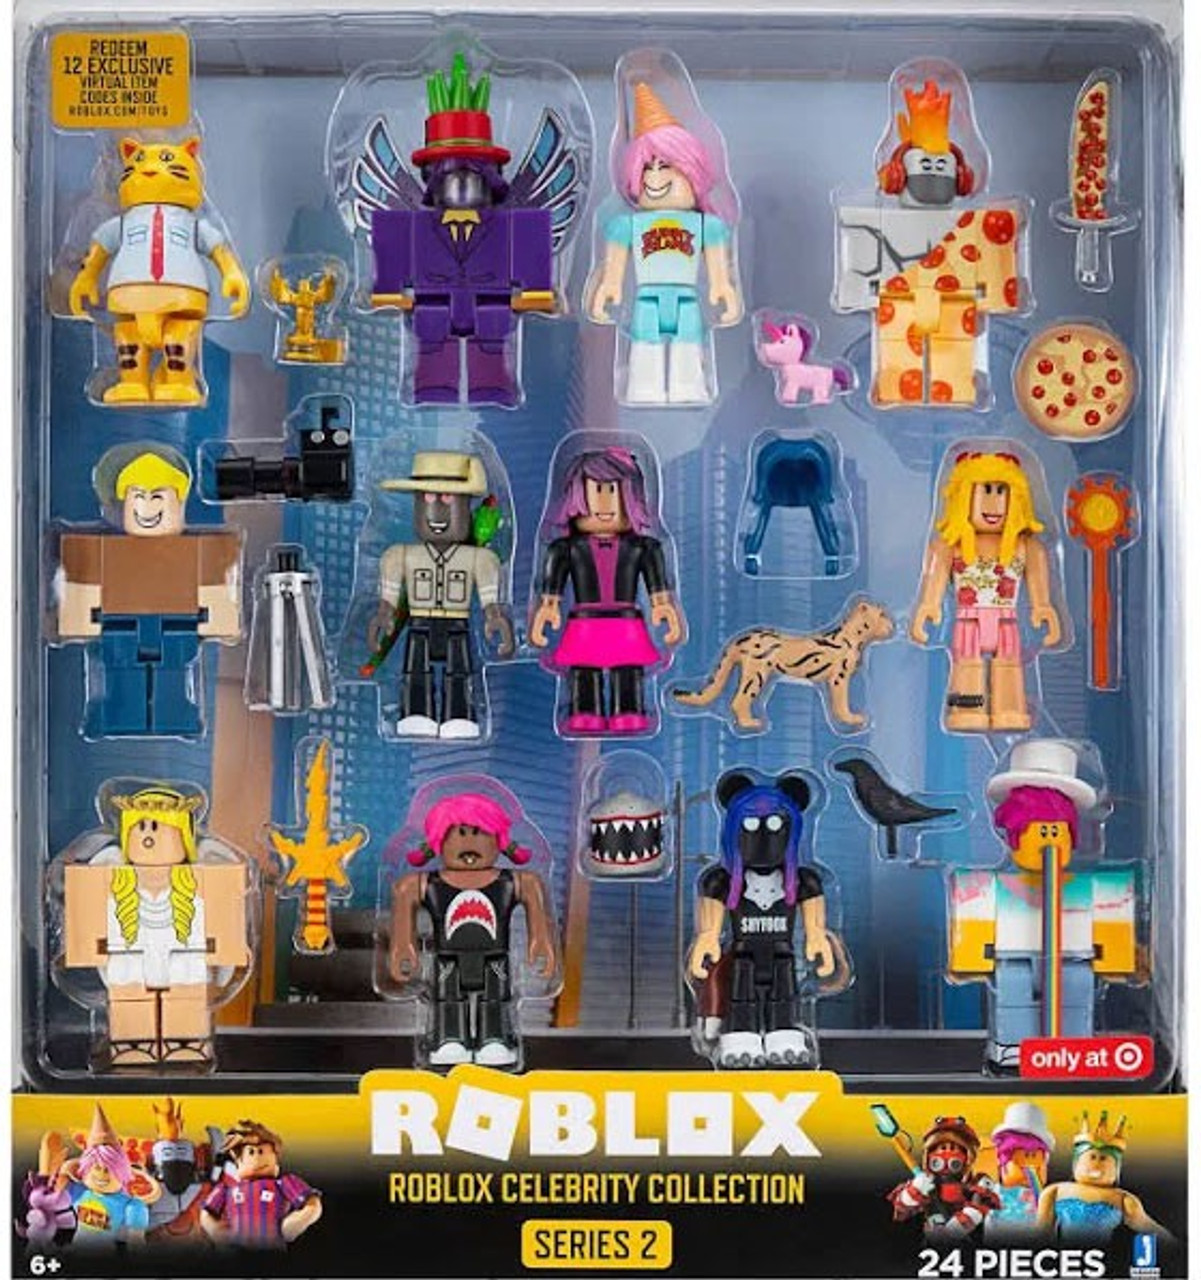 ROBLOX Series 7 Age 6 up Jazwares Figure Collectors for sale online